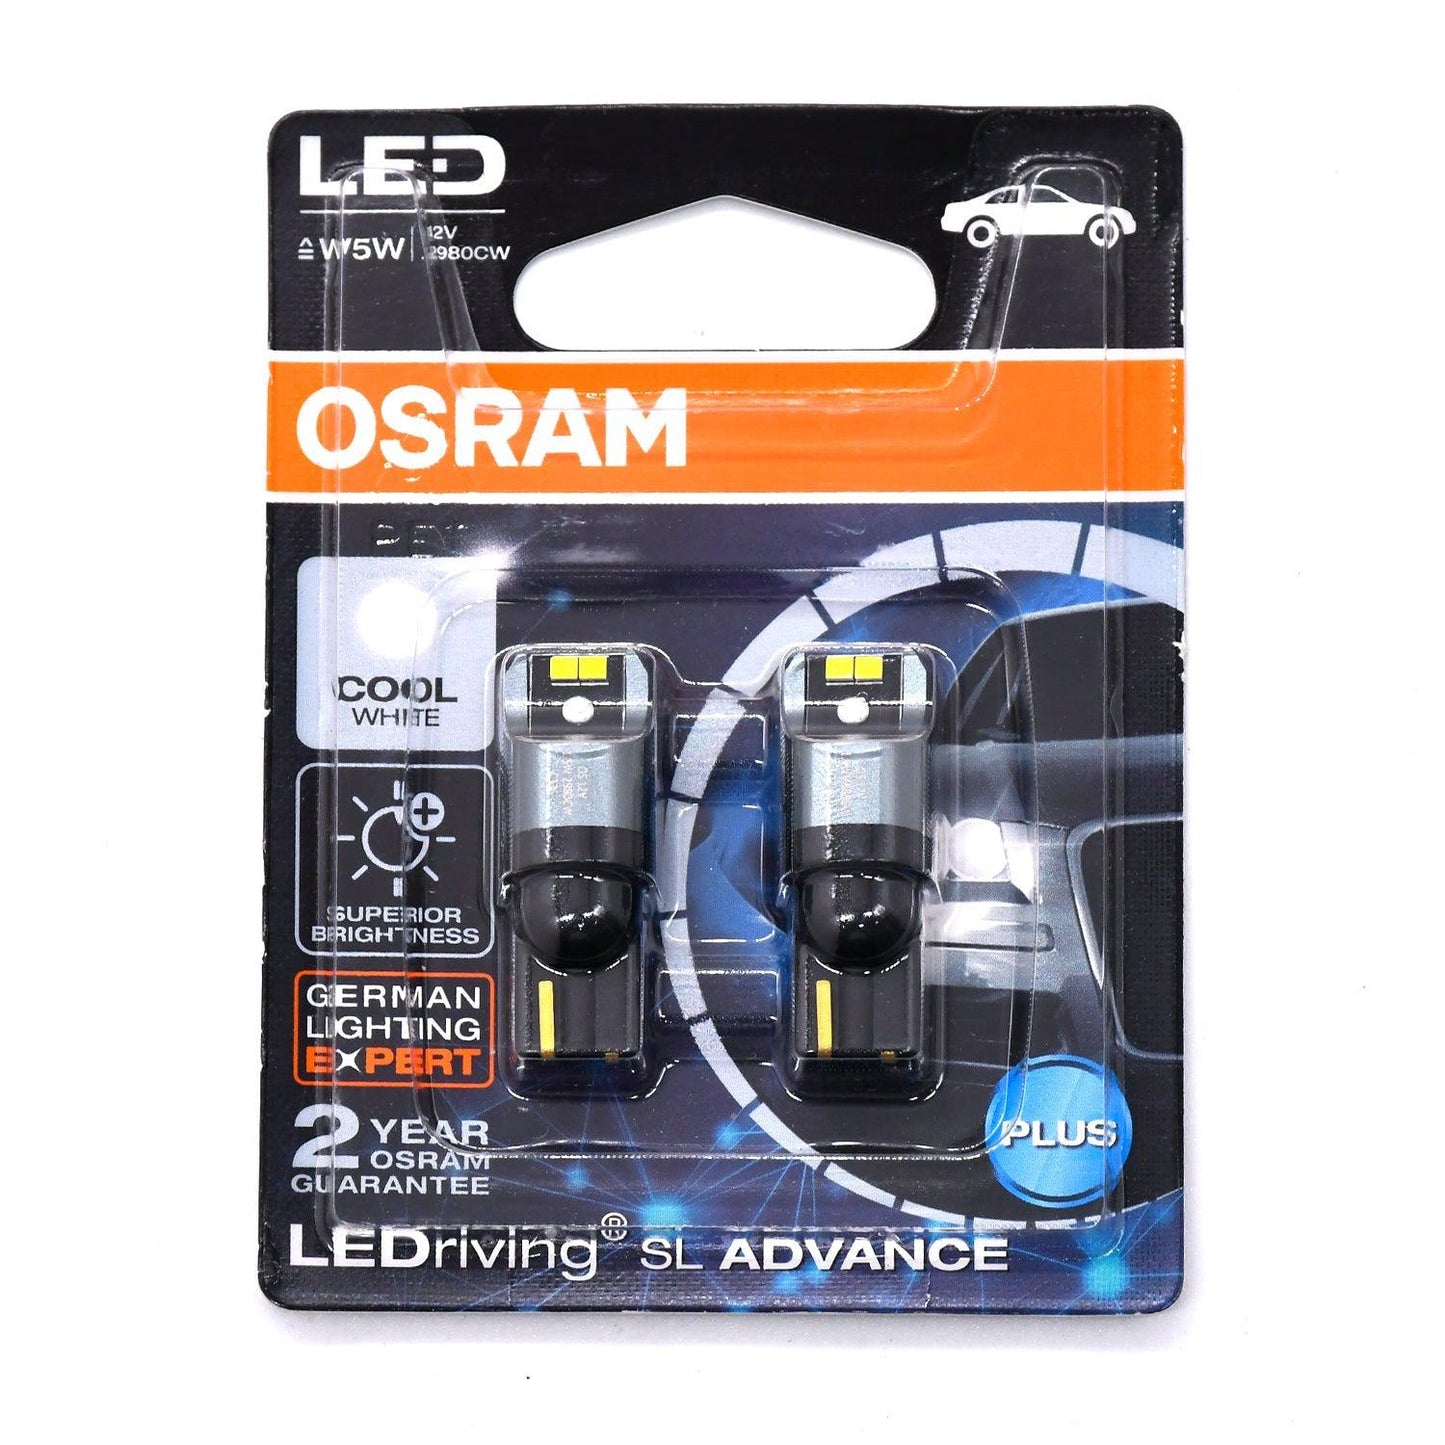 OSRAM LED T10 Parking Lamps, 6000K, Cool White, Pair at Rs 349